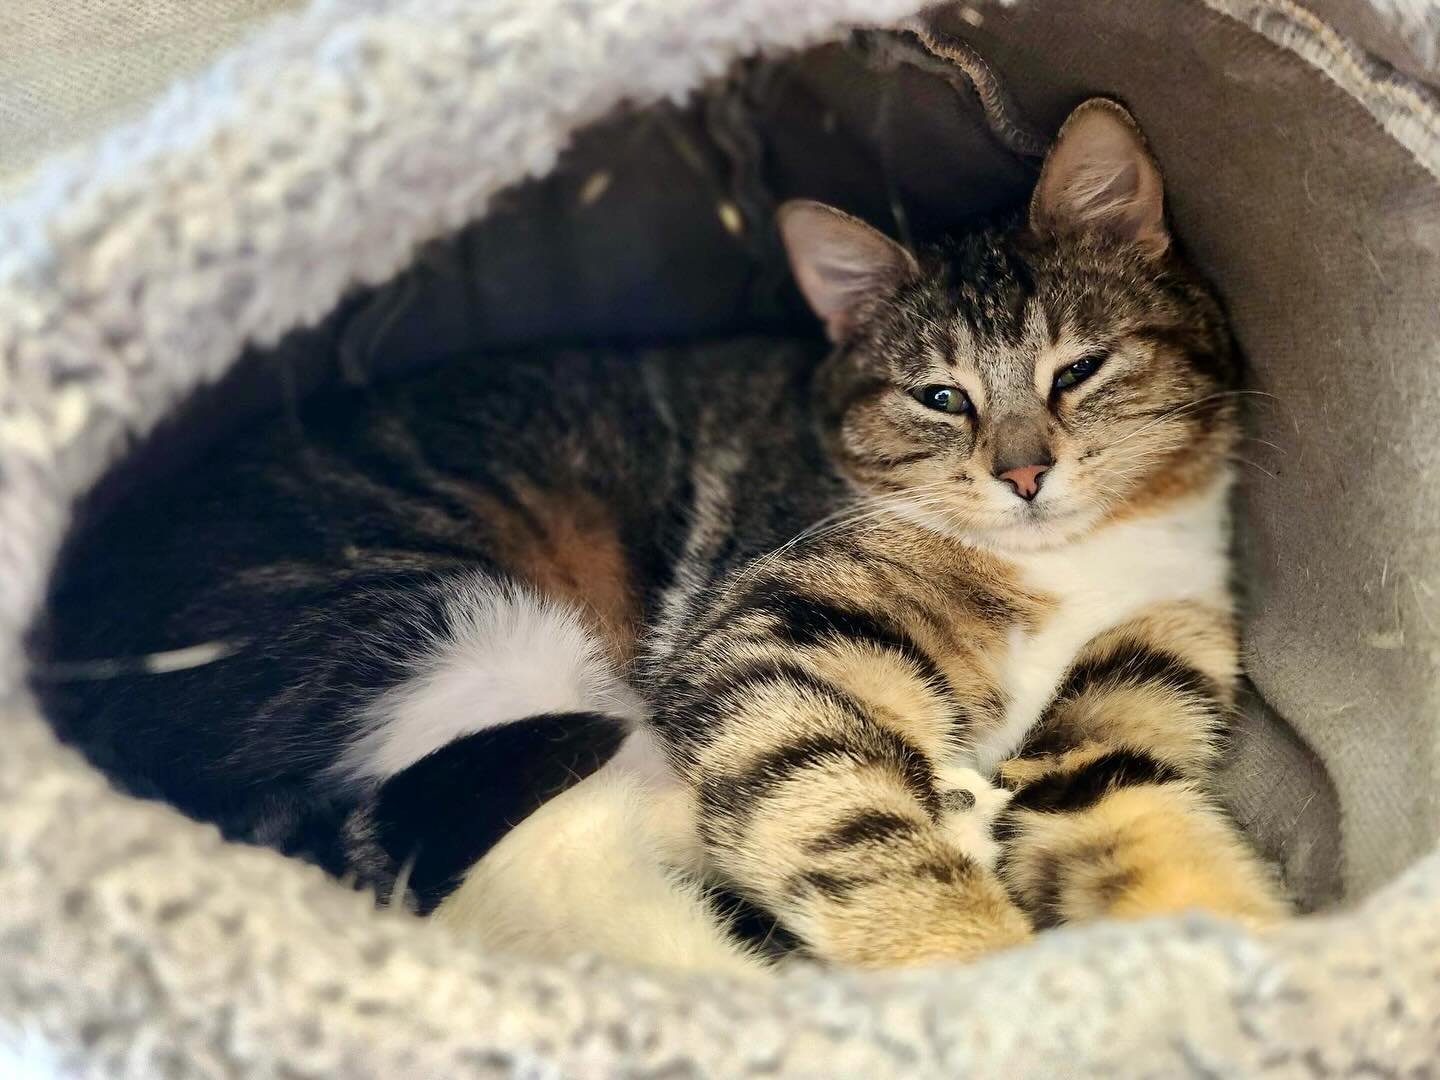 Phish tugging at your heartstrings with her saddest face 🥺 she is on the shy side but easygoing and super affectionate. Book a reservation and come meet her!

#regalcatcafe #yyccats #yyccatcafe #yyctourism #catsofyyc #catsofinstagram #supportlocalyy